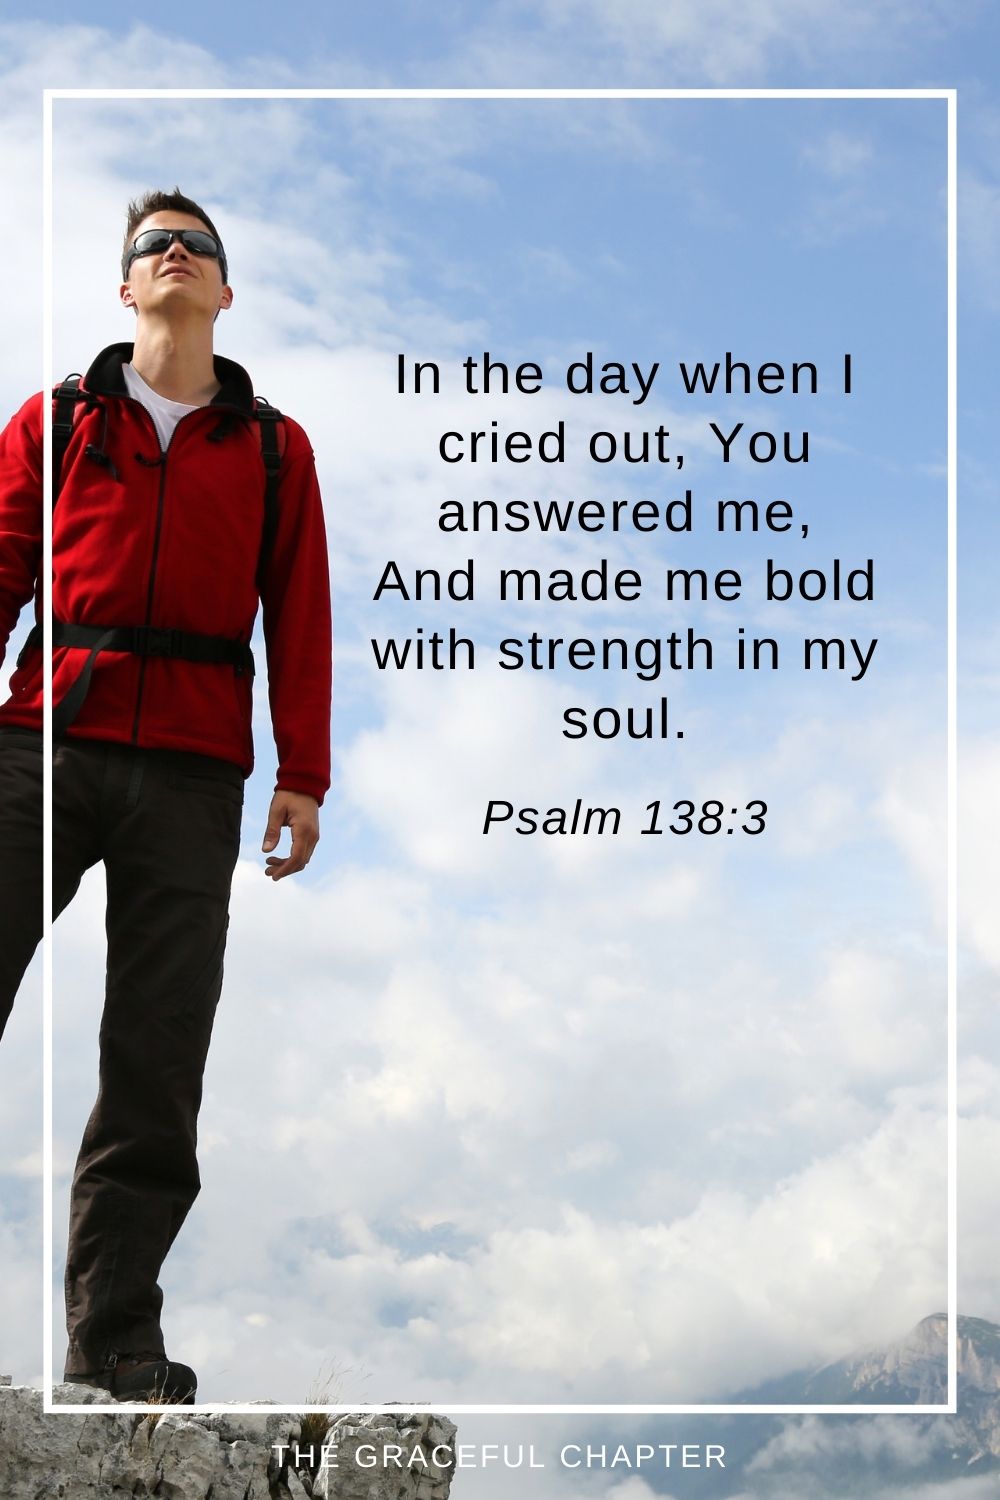 In the day when I cried out, You answered me, And made me bold with strength in my soul. Psalm 138:3